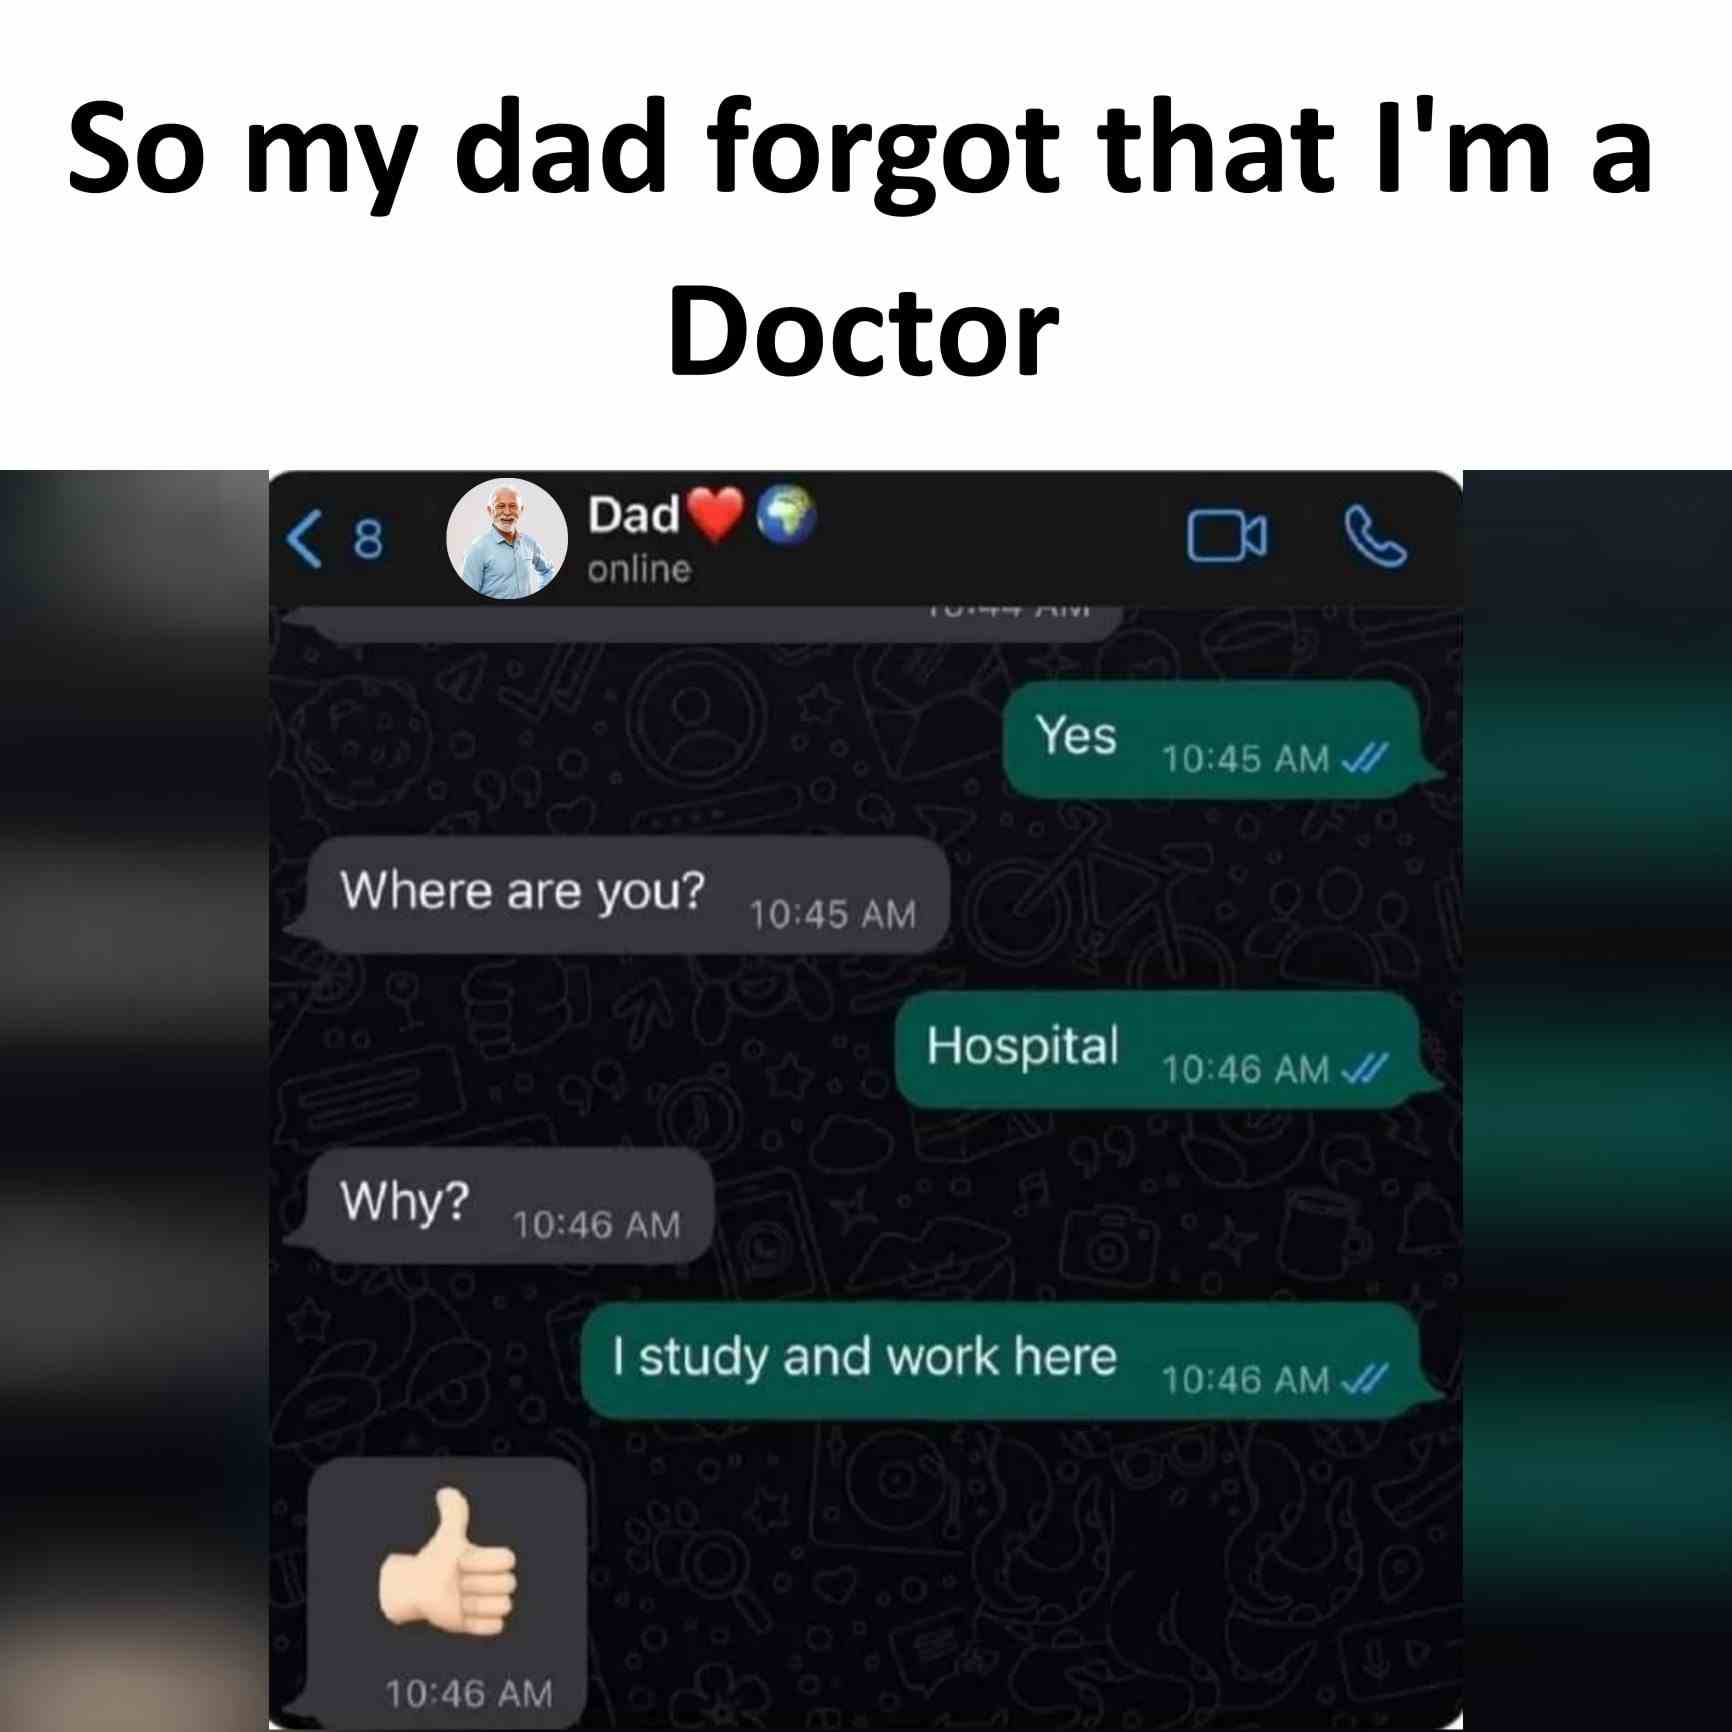 So my dad forgot that i'm a Doctor